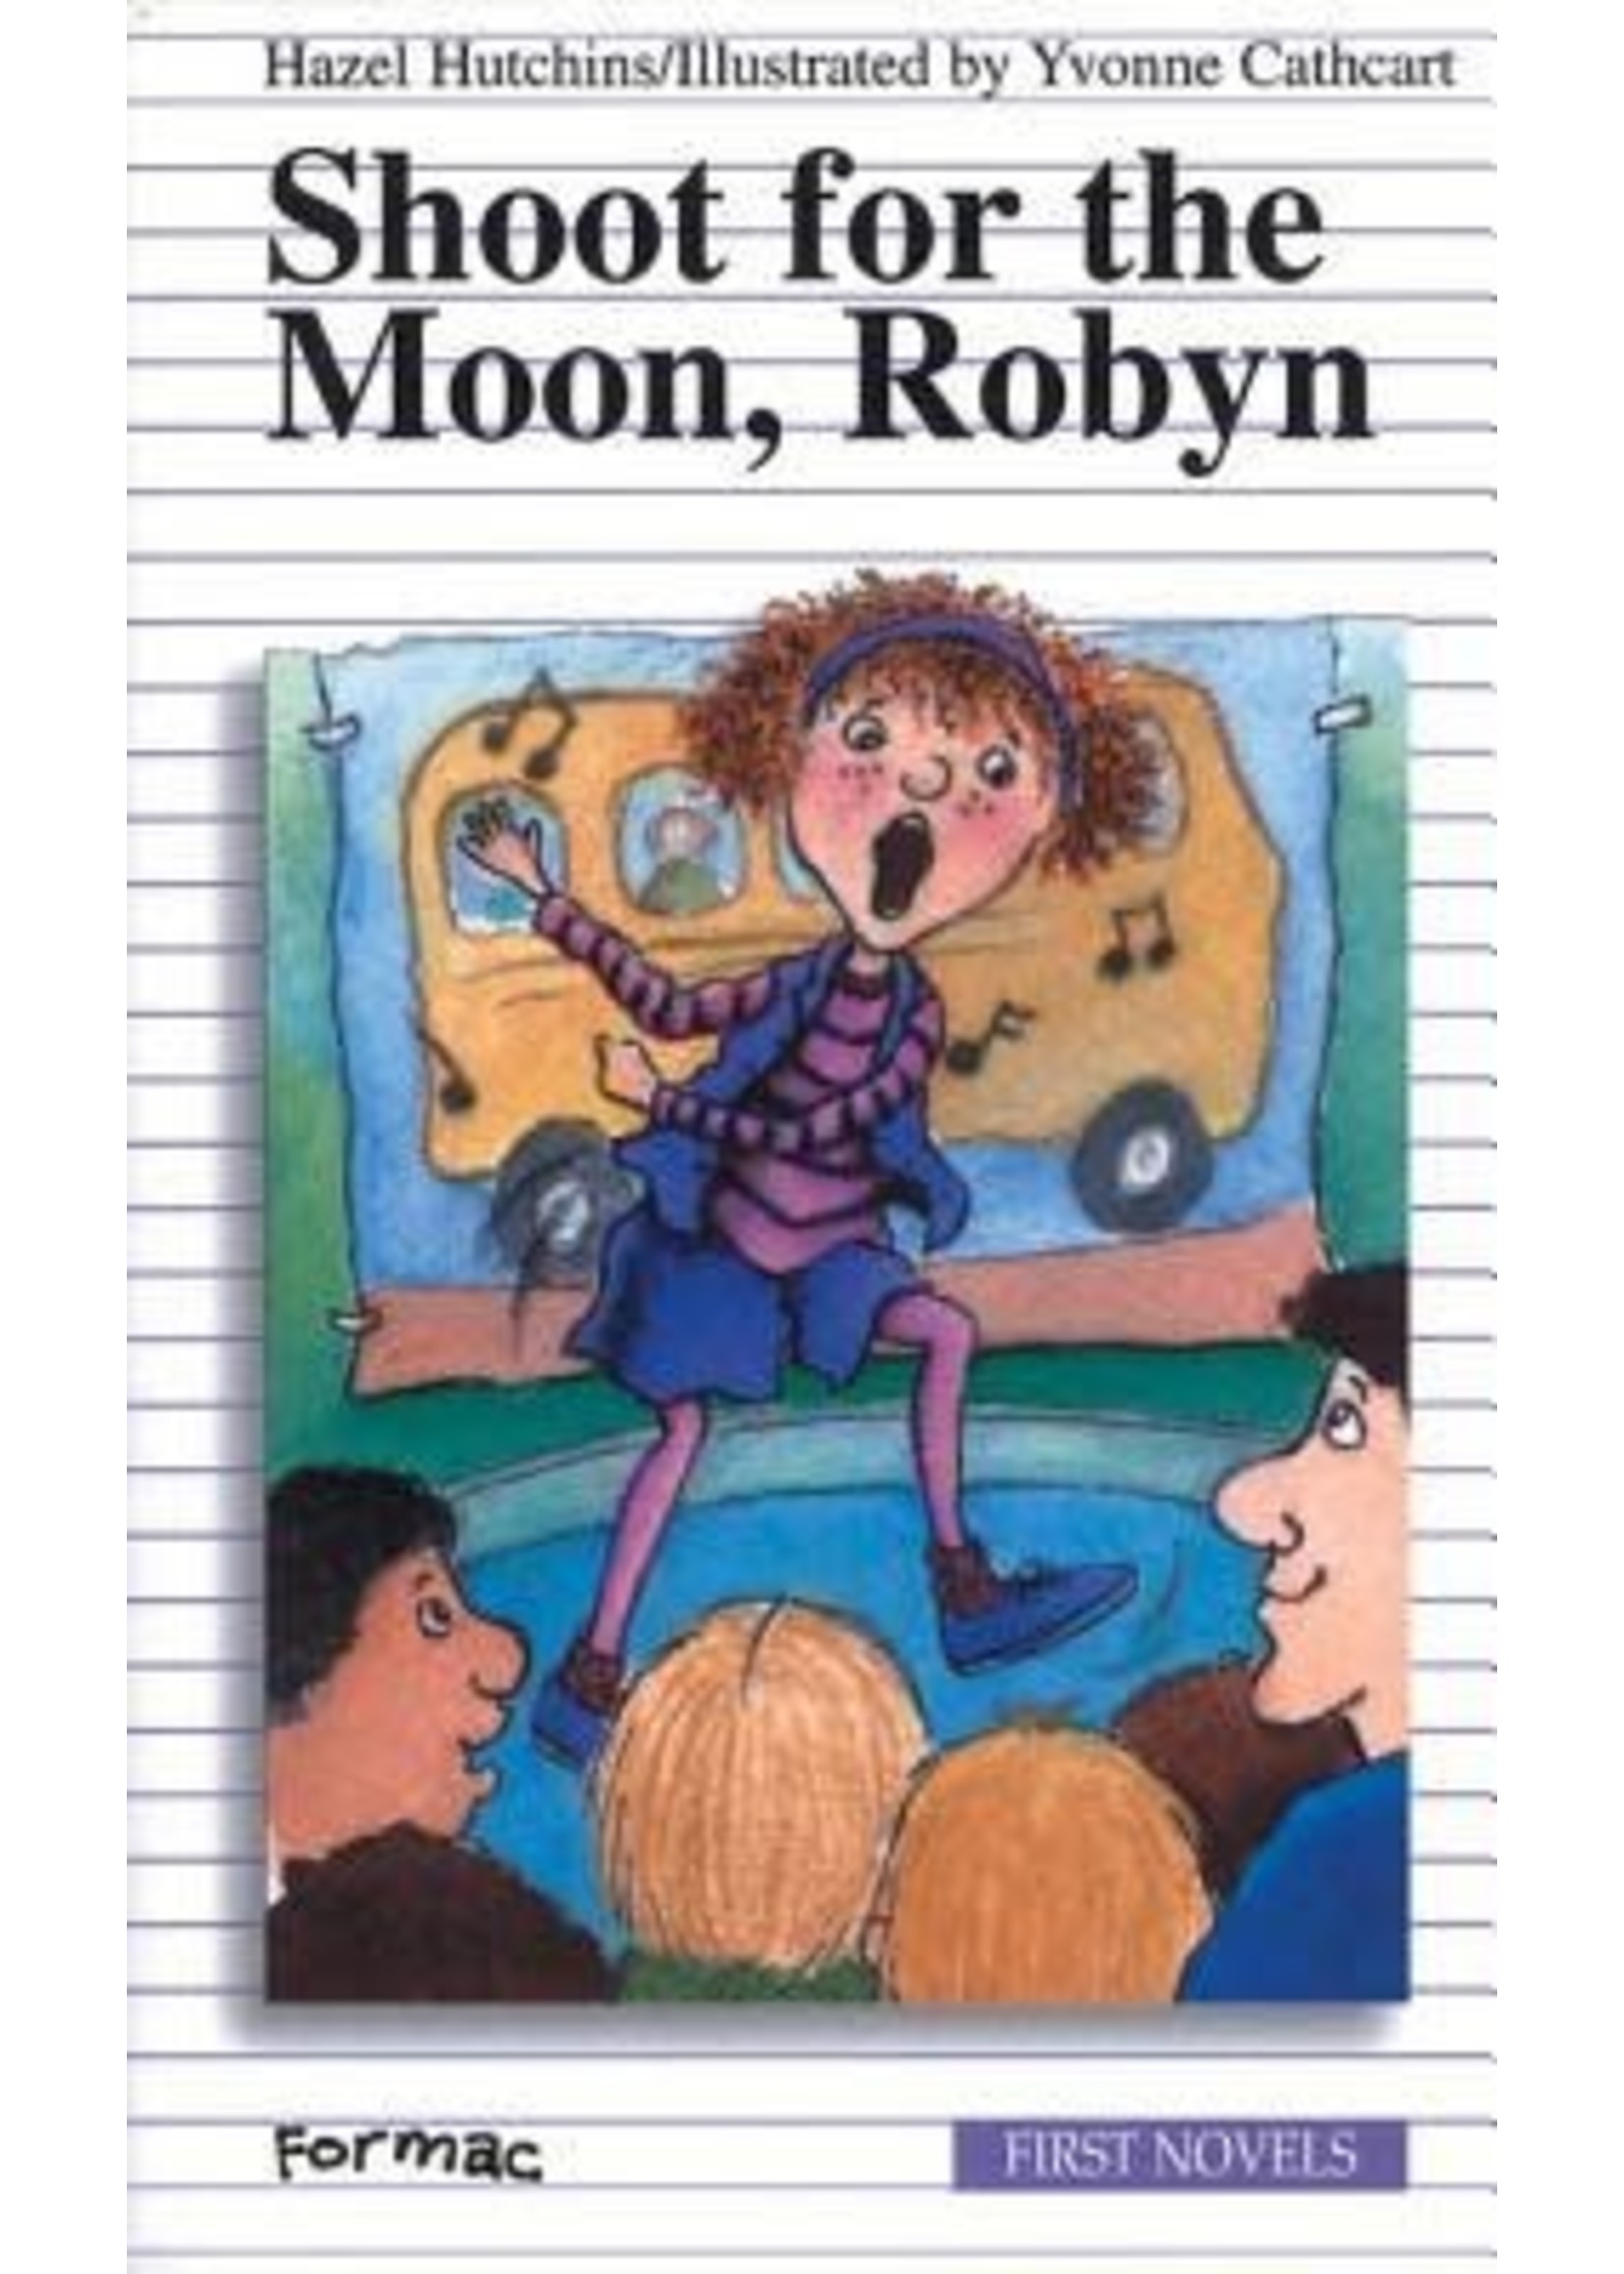 Shoot for the Moon, Robyn by Hazel Hutchins, Yvonne Cathcart